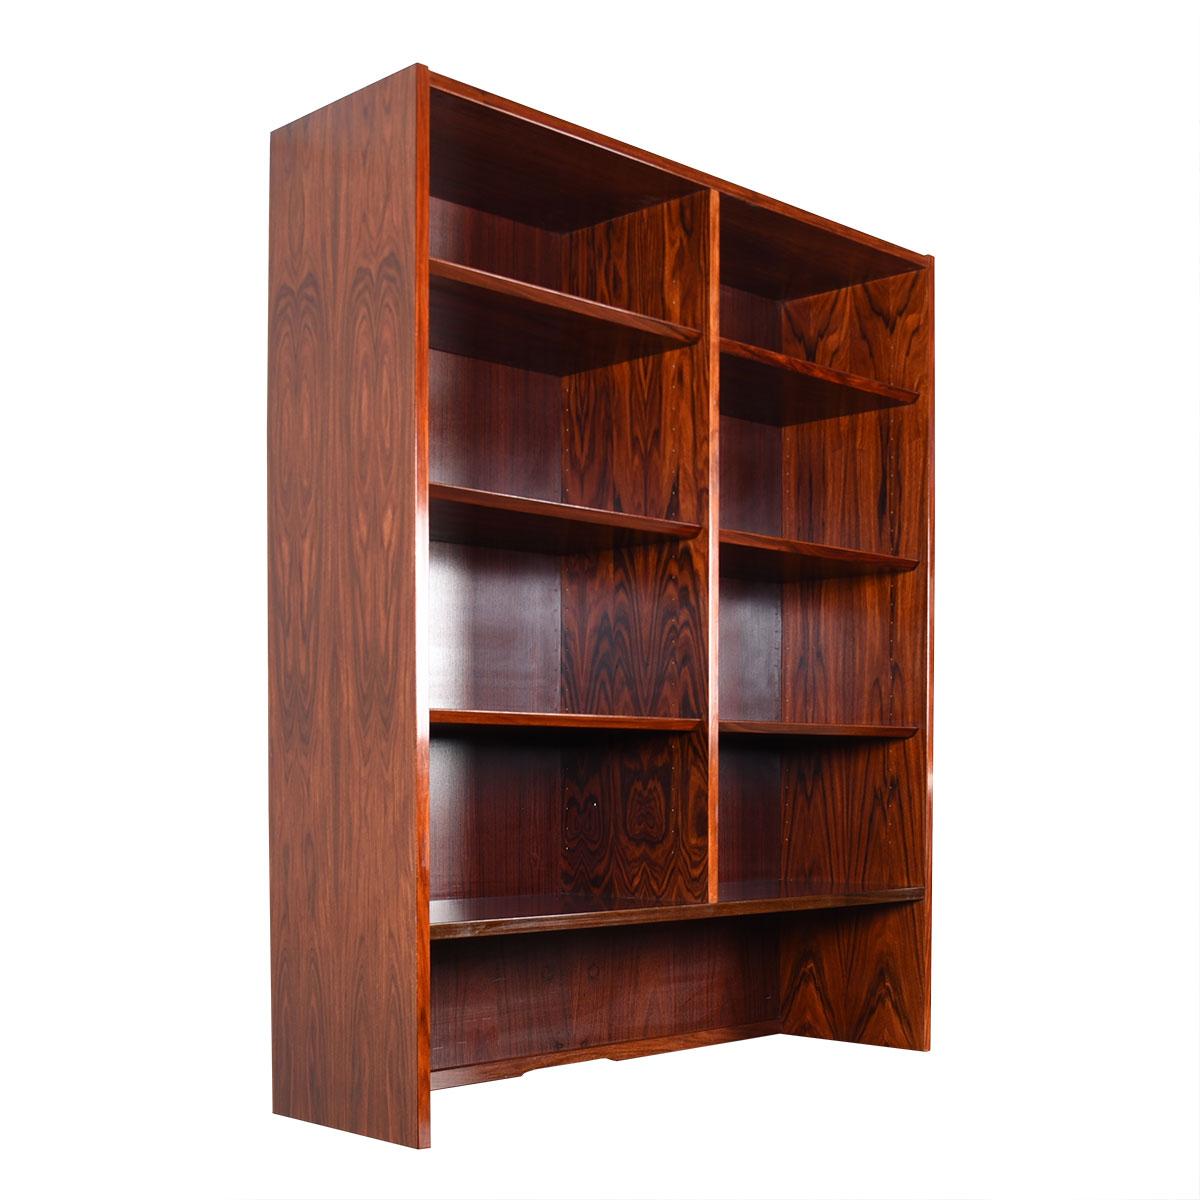 A Danish Modern rosewood bookcase / display top to store your precious items in minimalist splendor. This piece can also be placed atop another storage piece such as a sideboard. Shelves have beveled edges and are adjustable.

*Due to time, labor